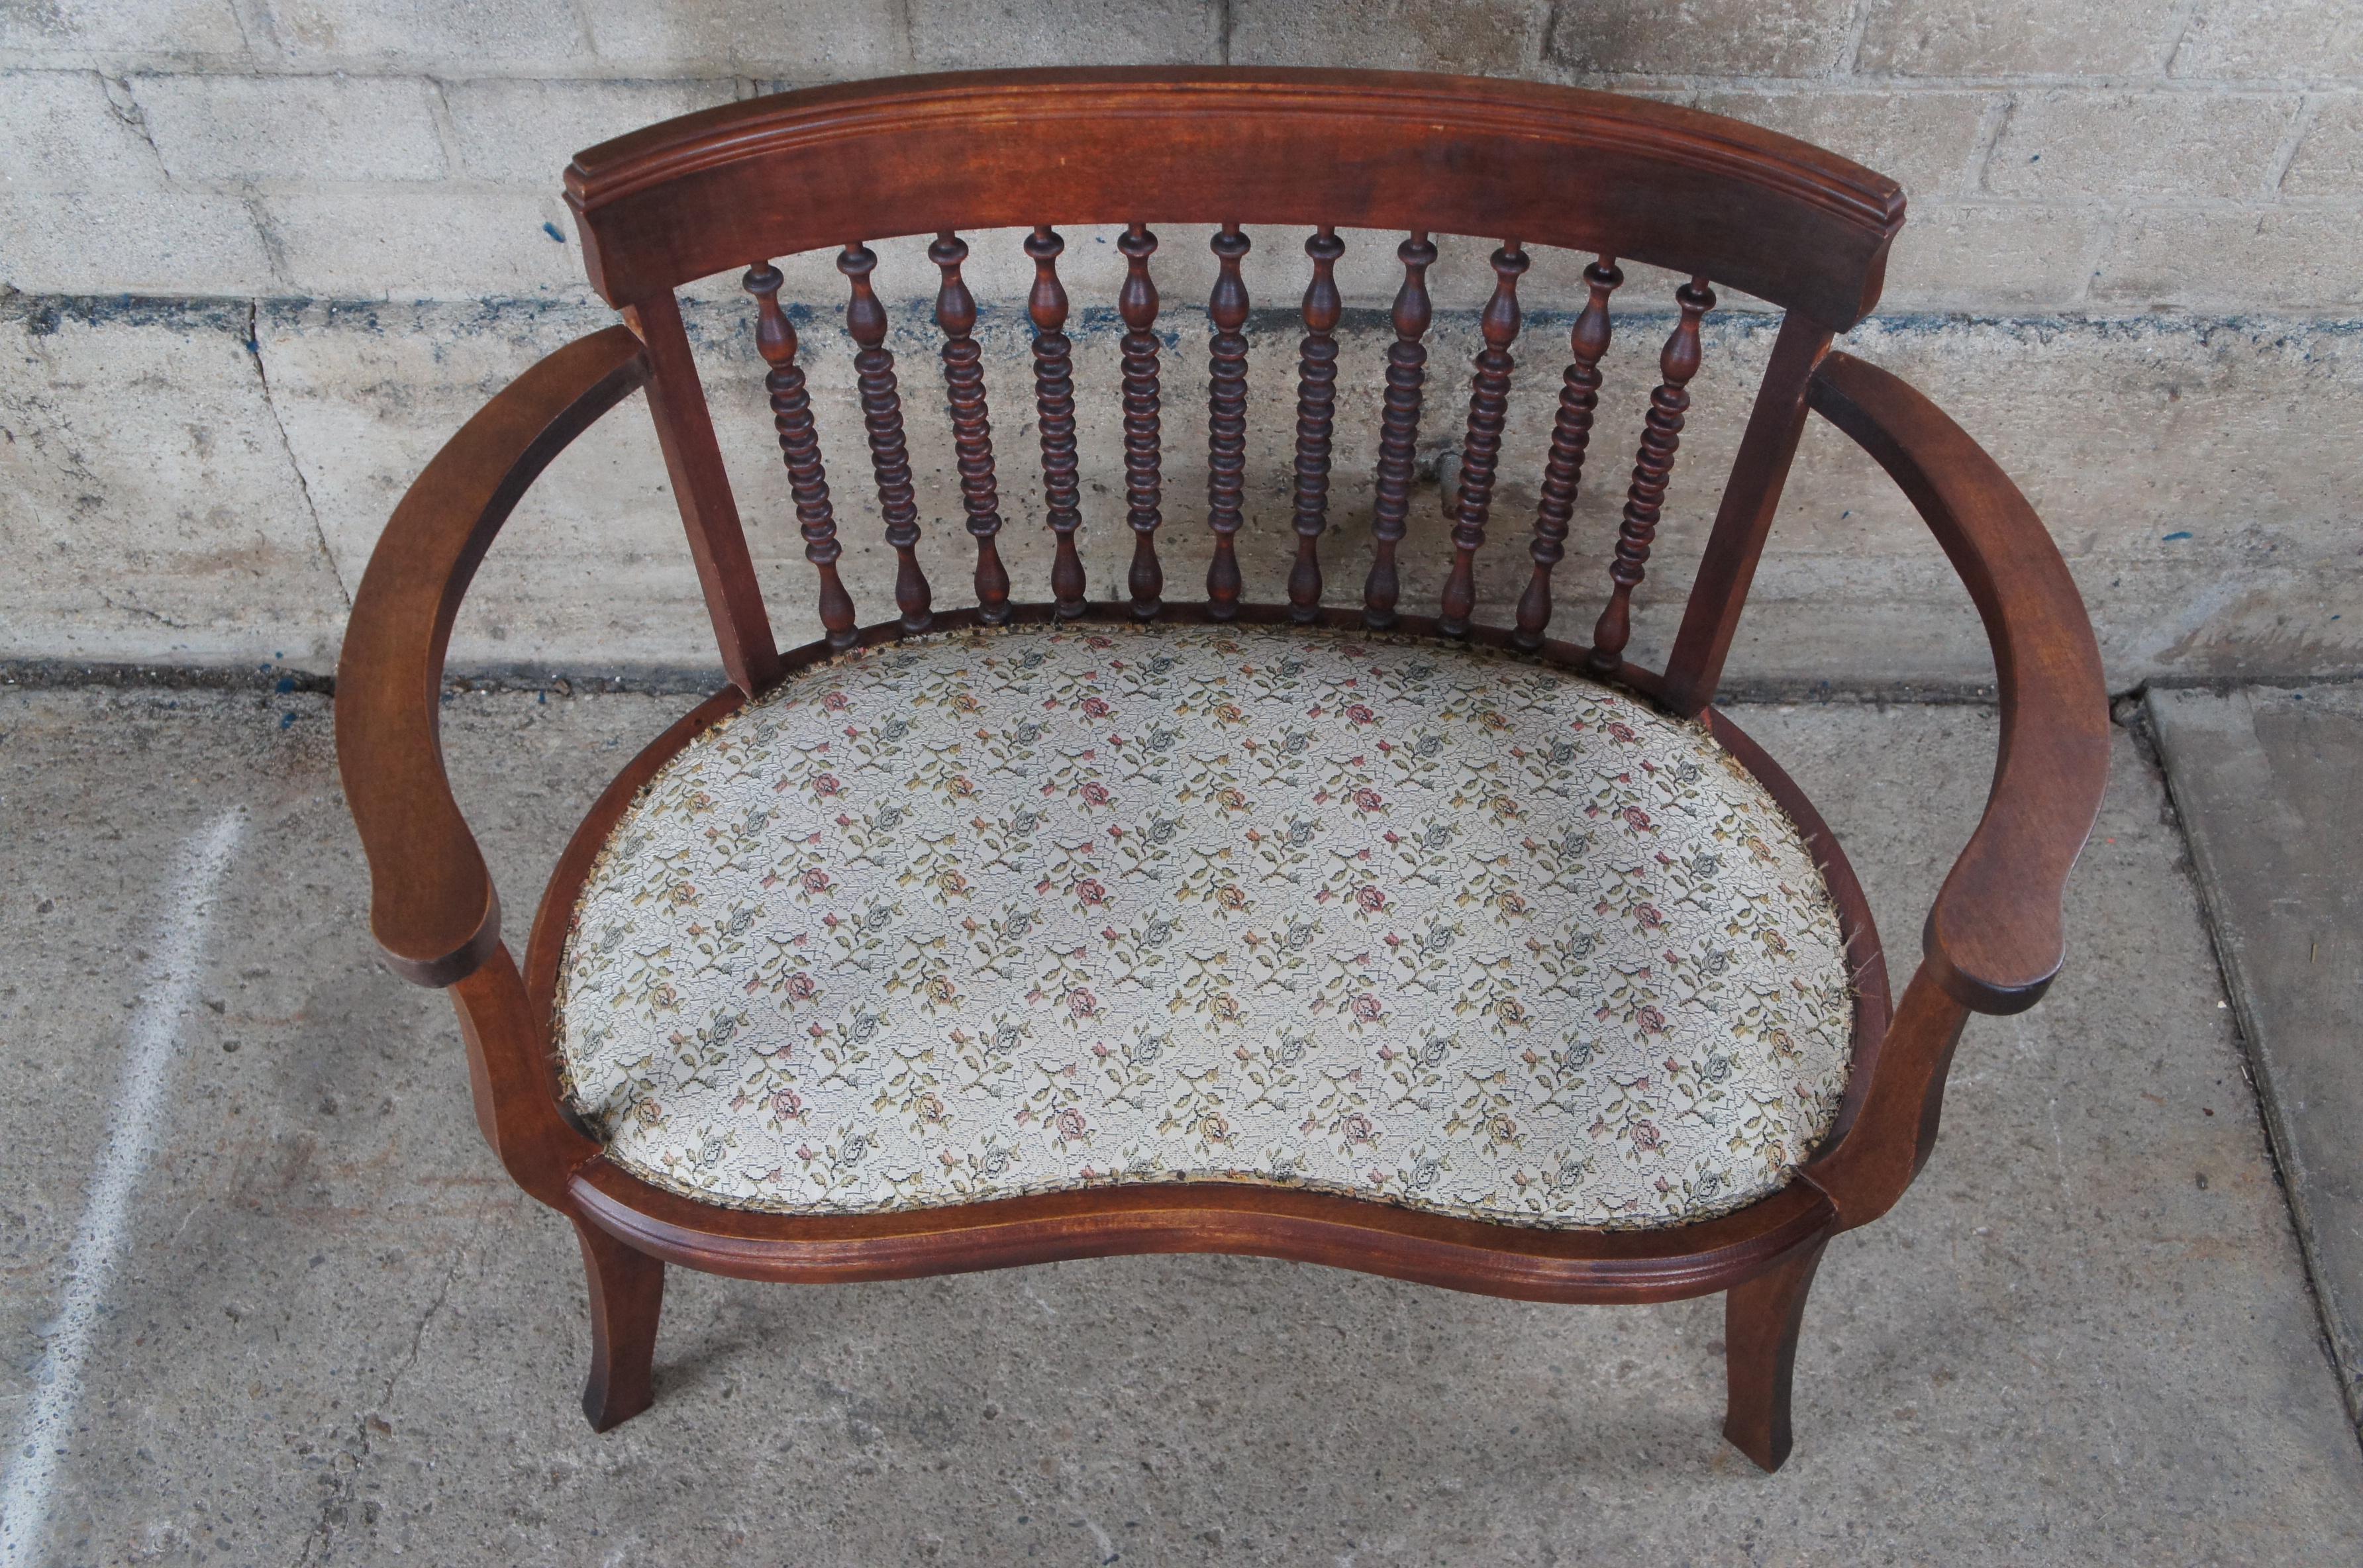 20th Century Antique Edwardian Mahogany Spindled Barrel Back Kidney Shaped Floral Seat Settee For Sale